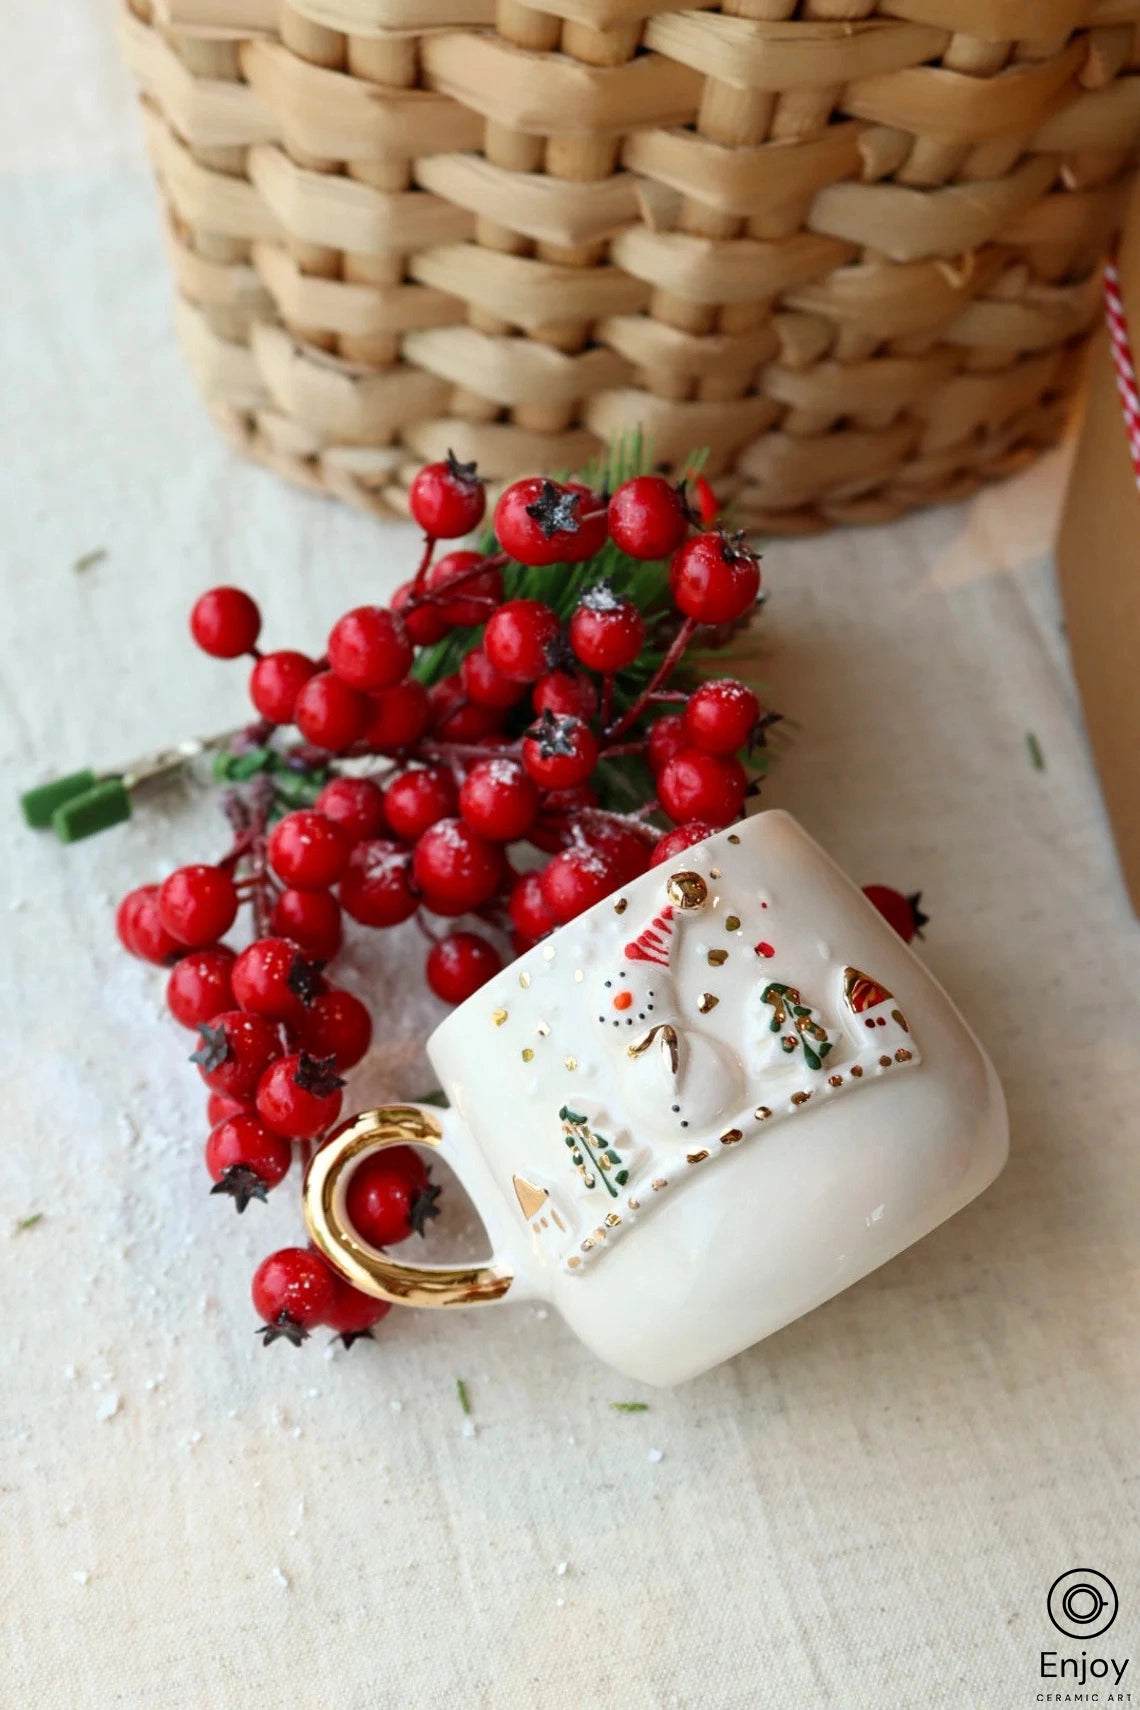 A festive espresso cup with golden rim and handle, adorned with a textured snowman and Christmas tree design, rests beside vibrant holly berries.